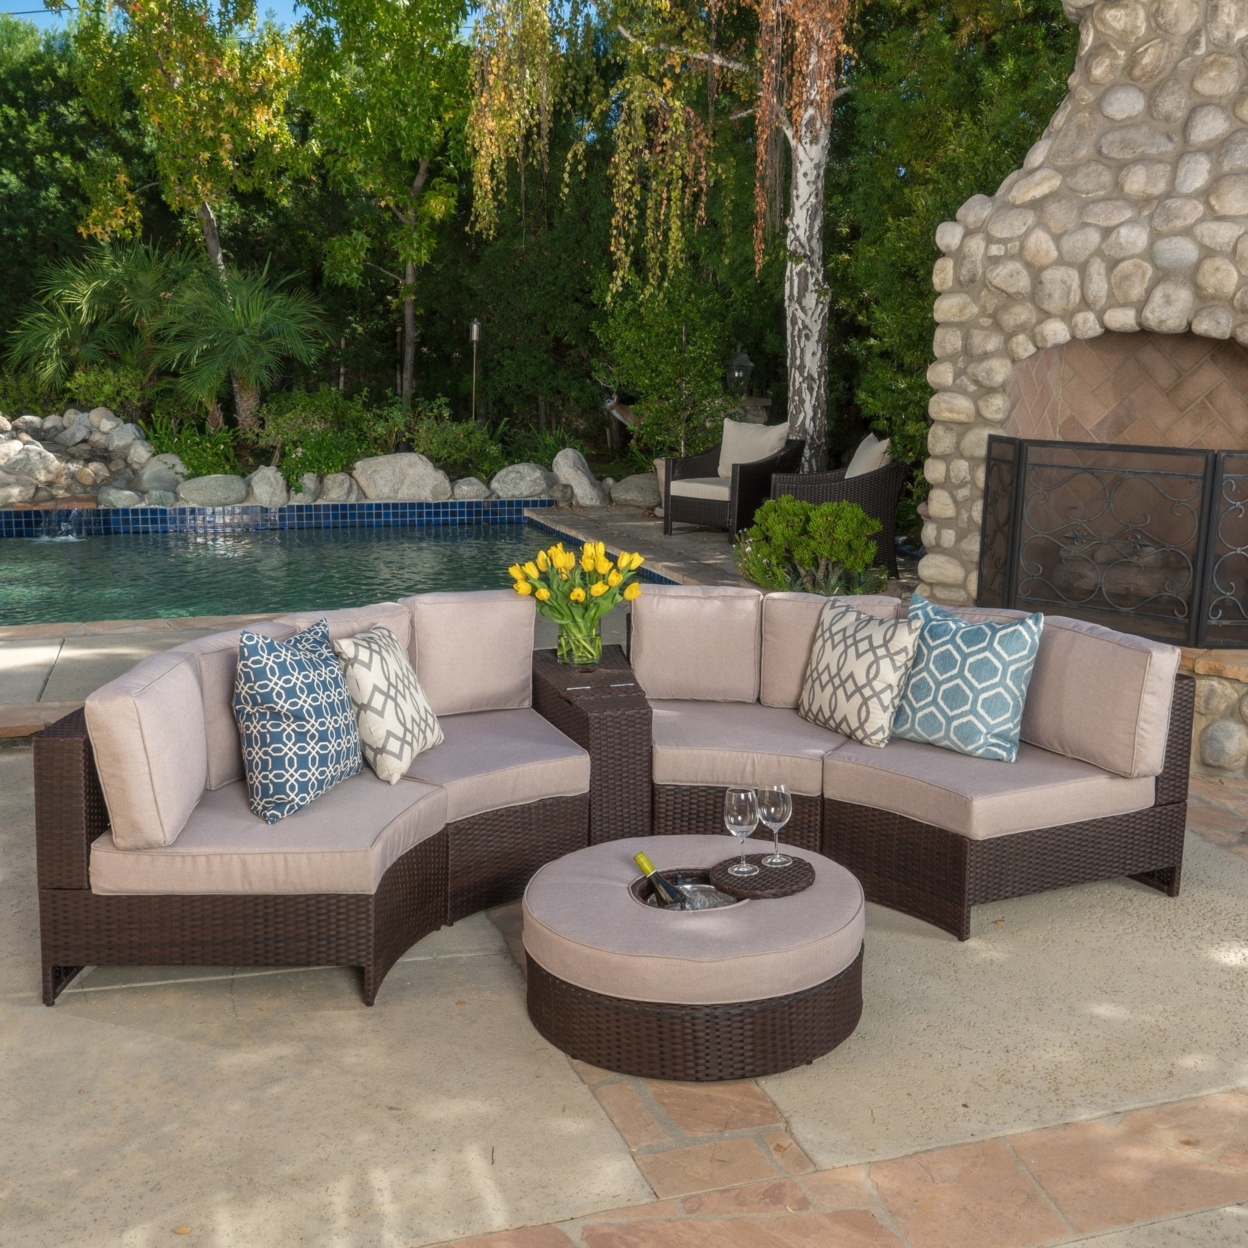 Riviera 6pc Outdoor Sectional Sofa Set With Storage Trunk & Ice Bucket - Blue